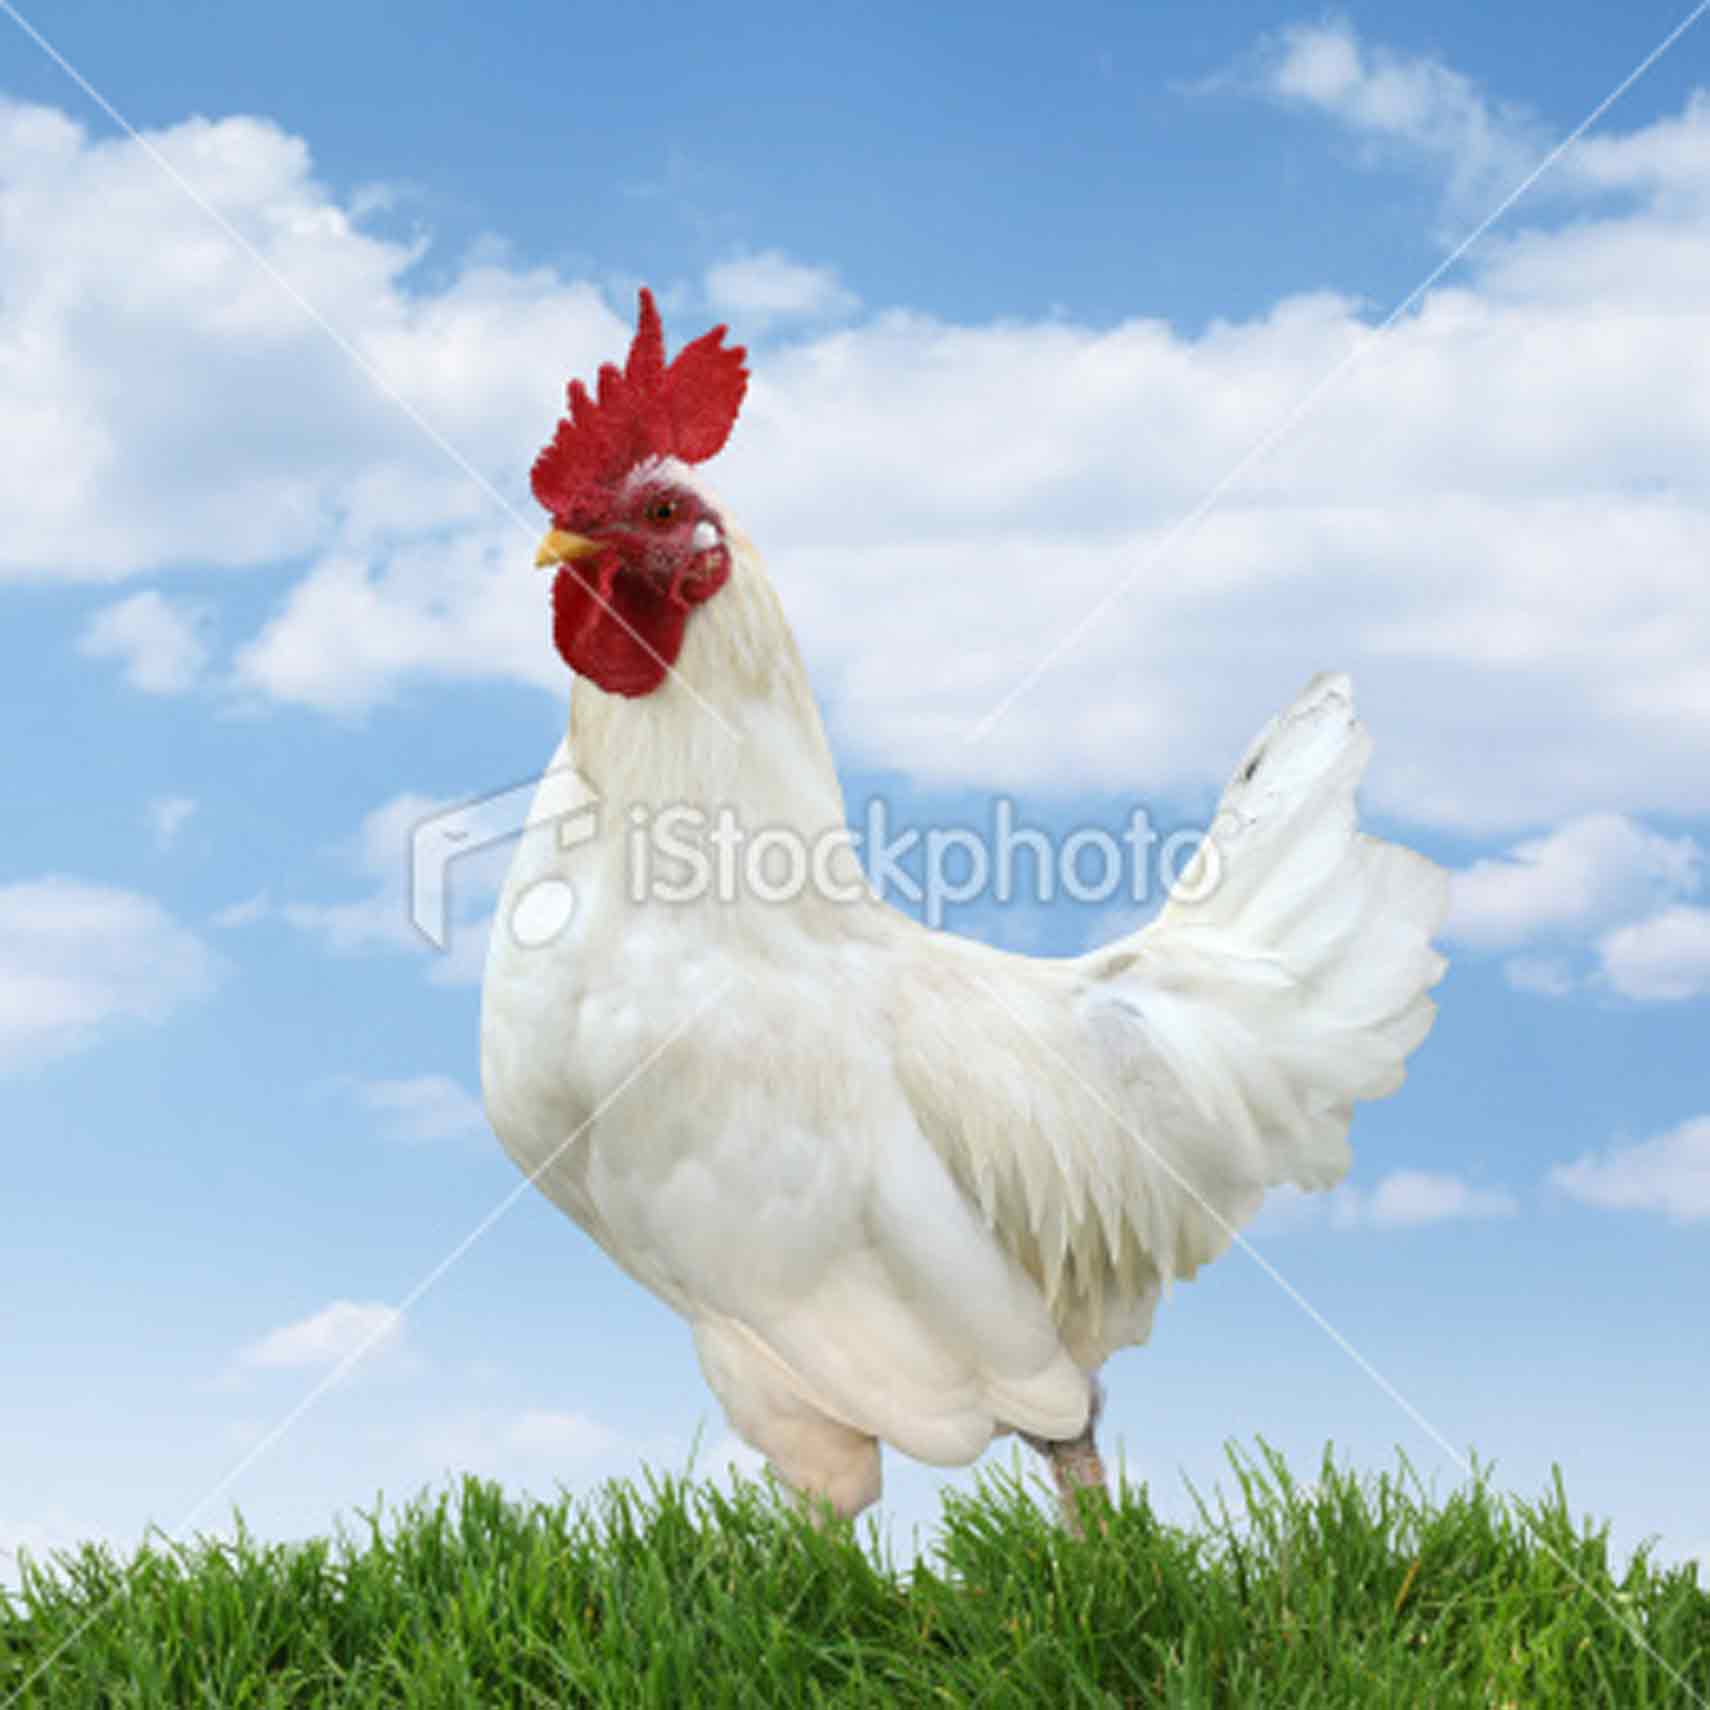 ist2_10208596-white-rooster